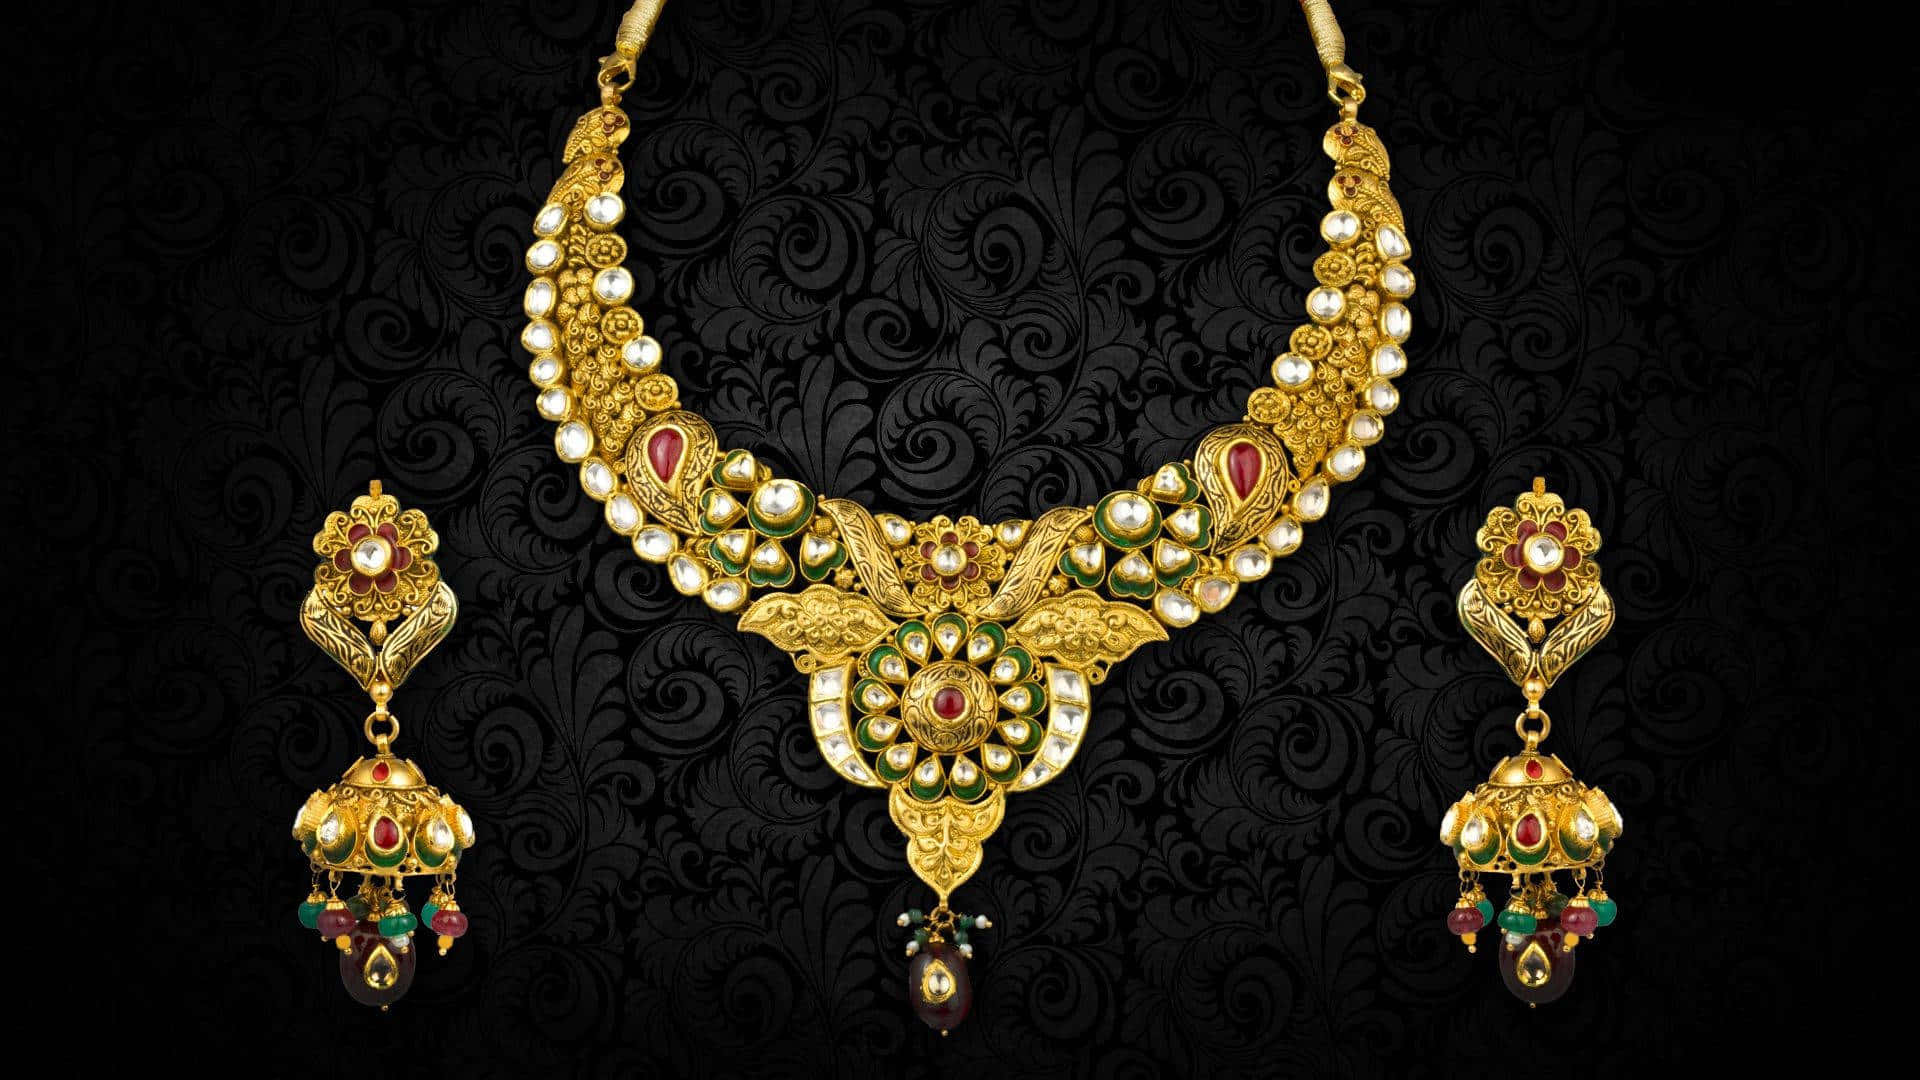 A Gold Necklace And Earrings Set With Stones